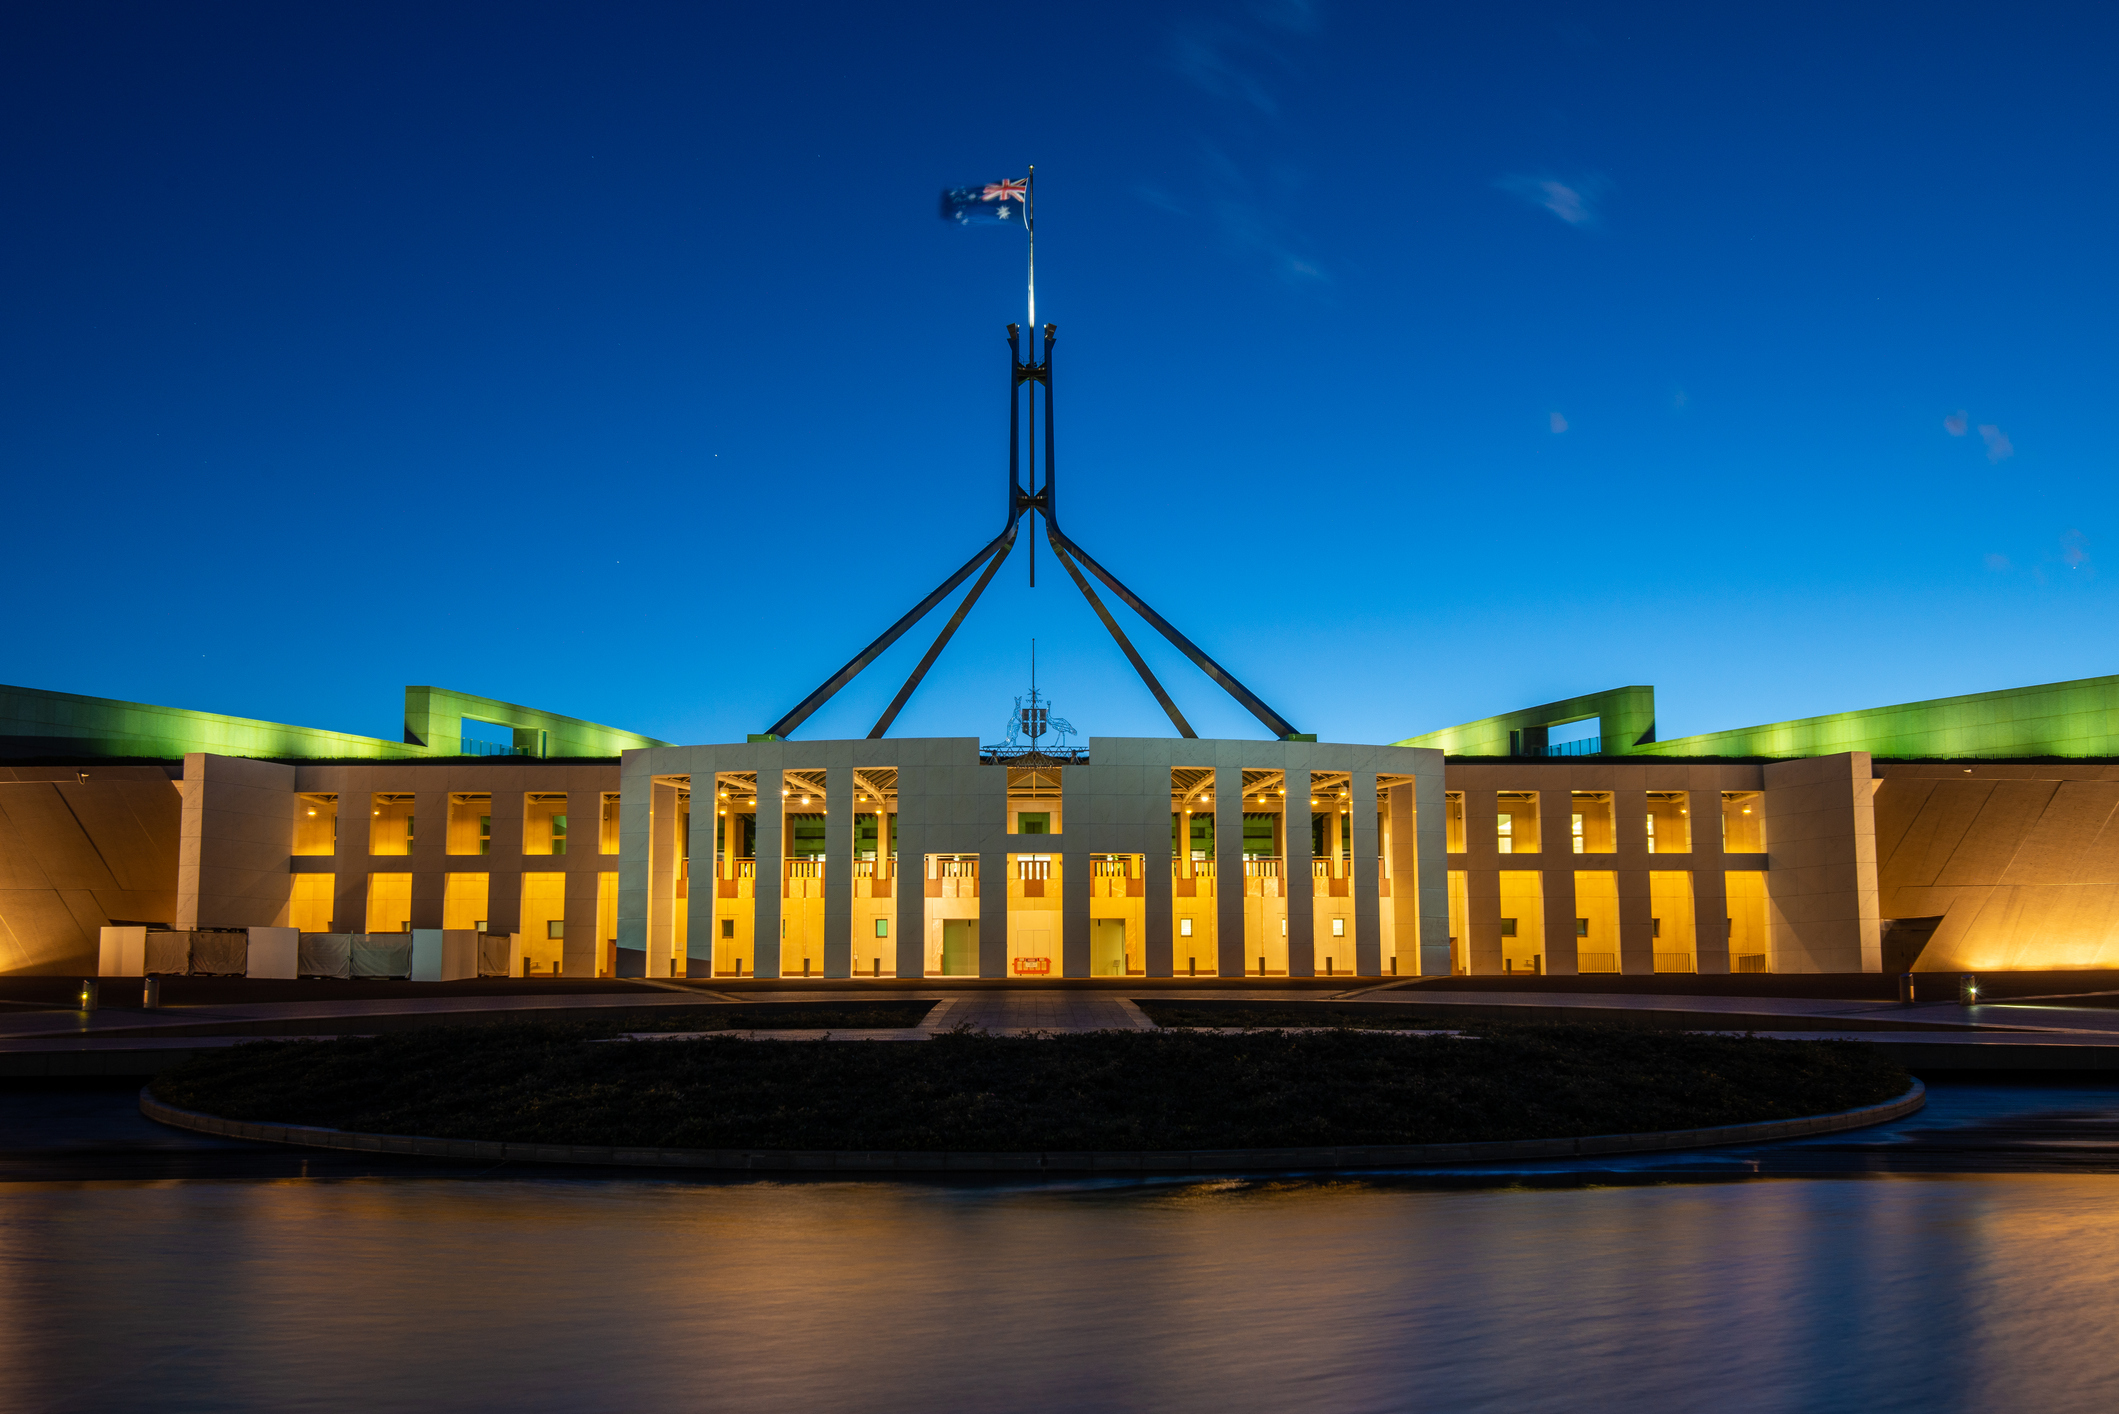 New Parliament House, Canberra, ACT, Australia with ...